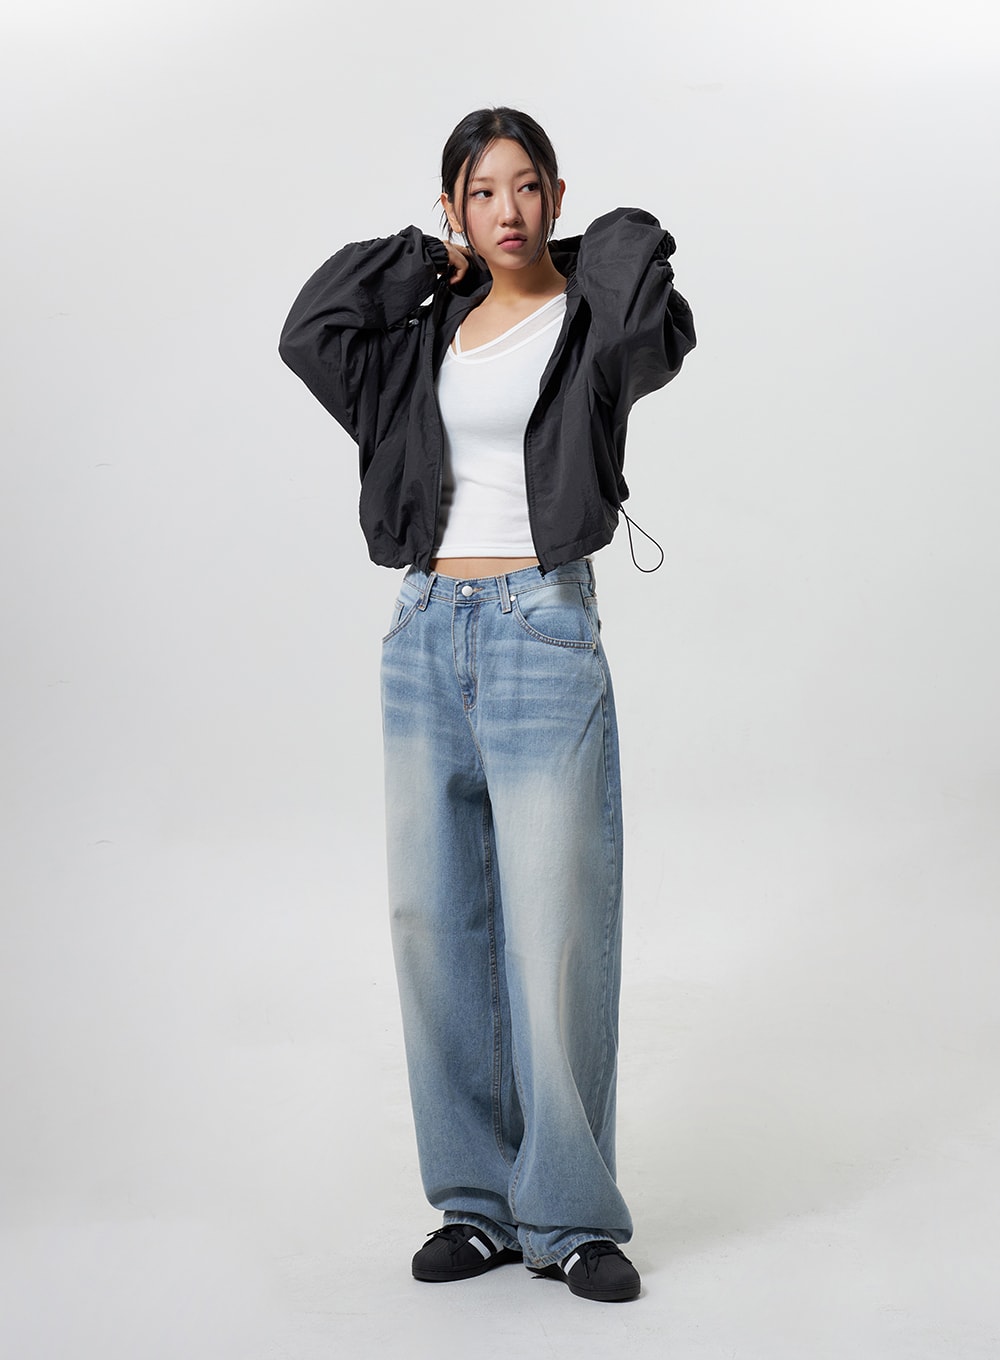 low-rise-baggy-jeans-cy324